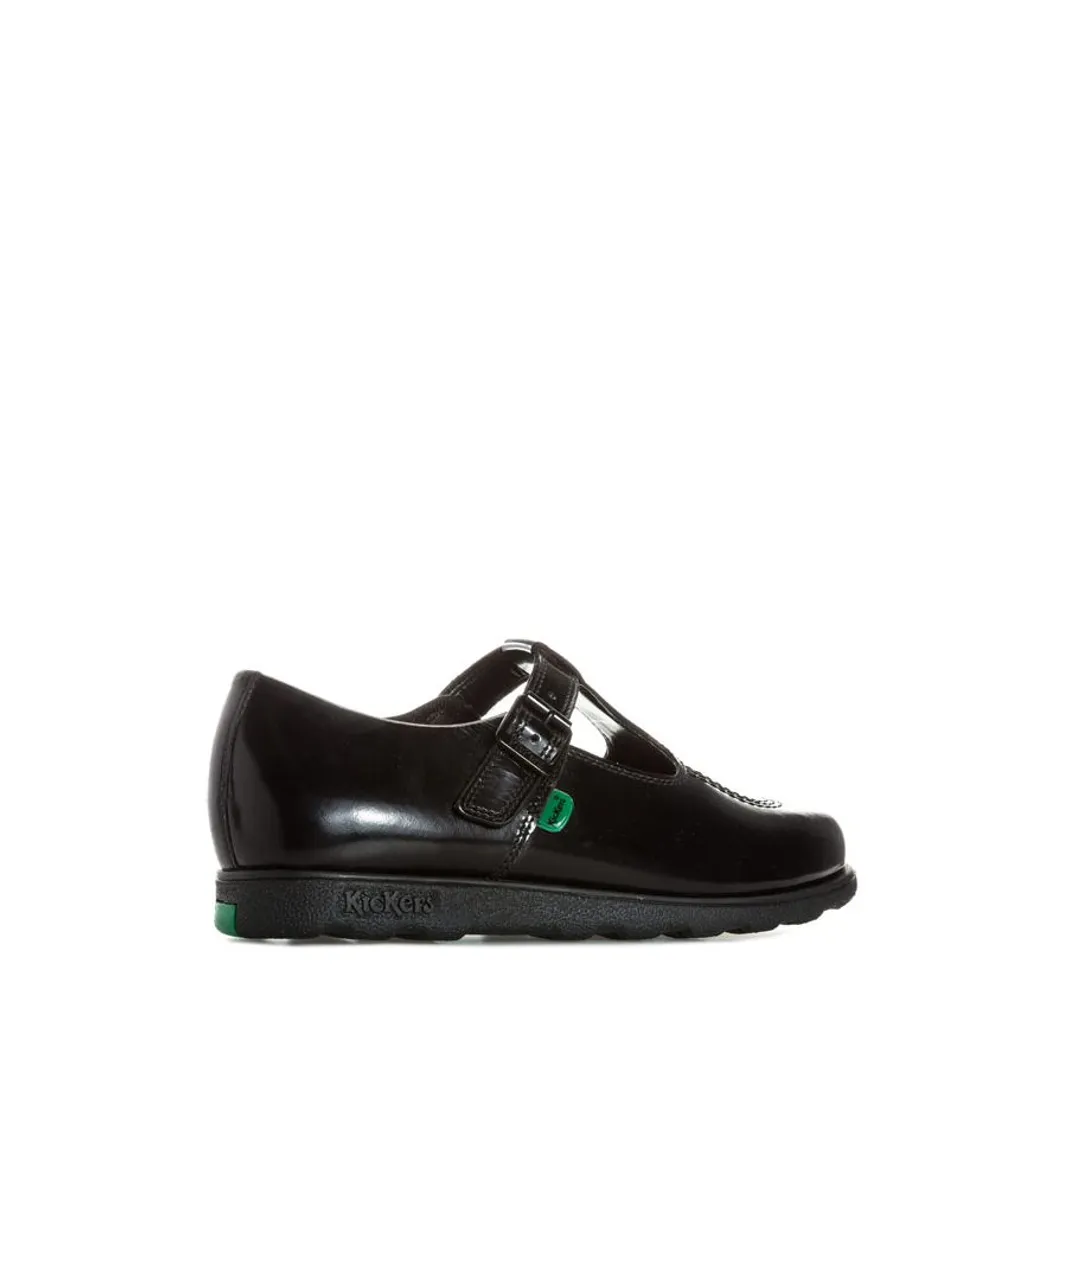 Kickers Womenss Fragma T Patent Shoes in Black Leather (archived)